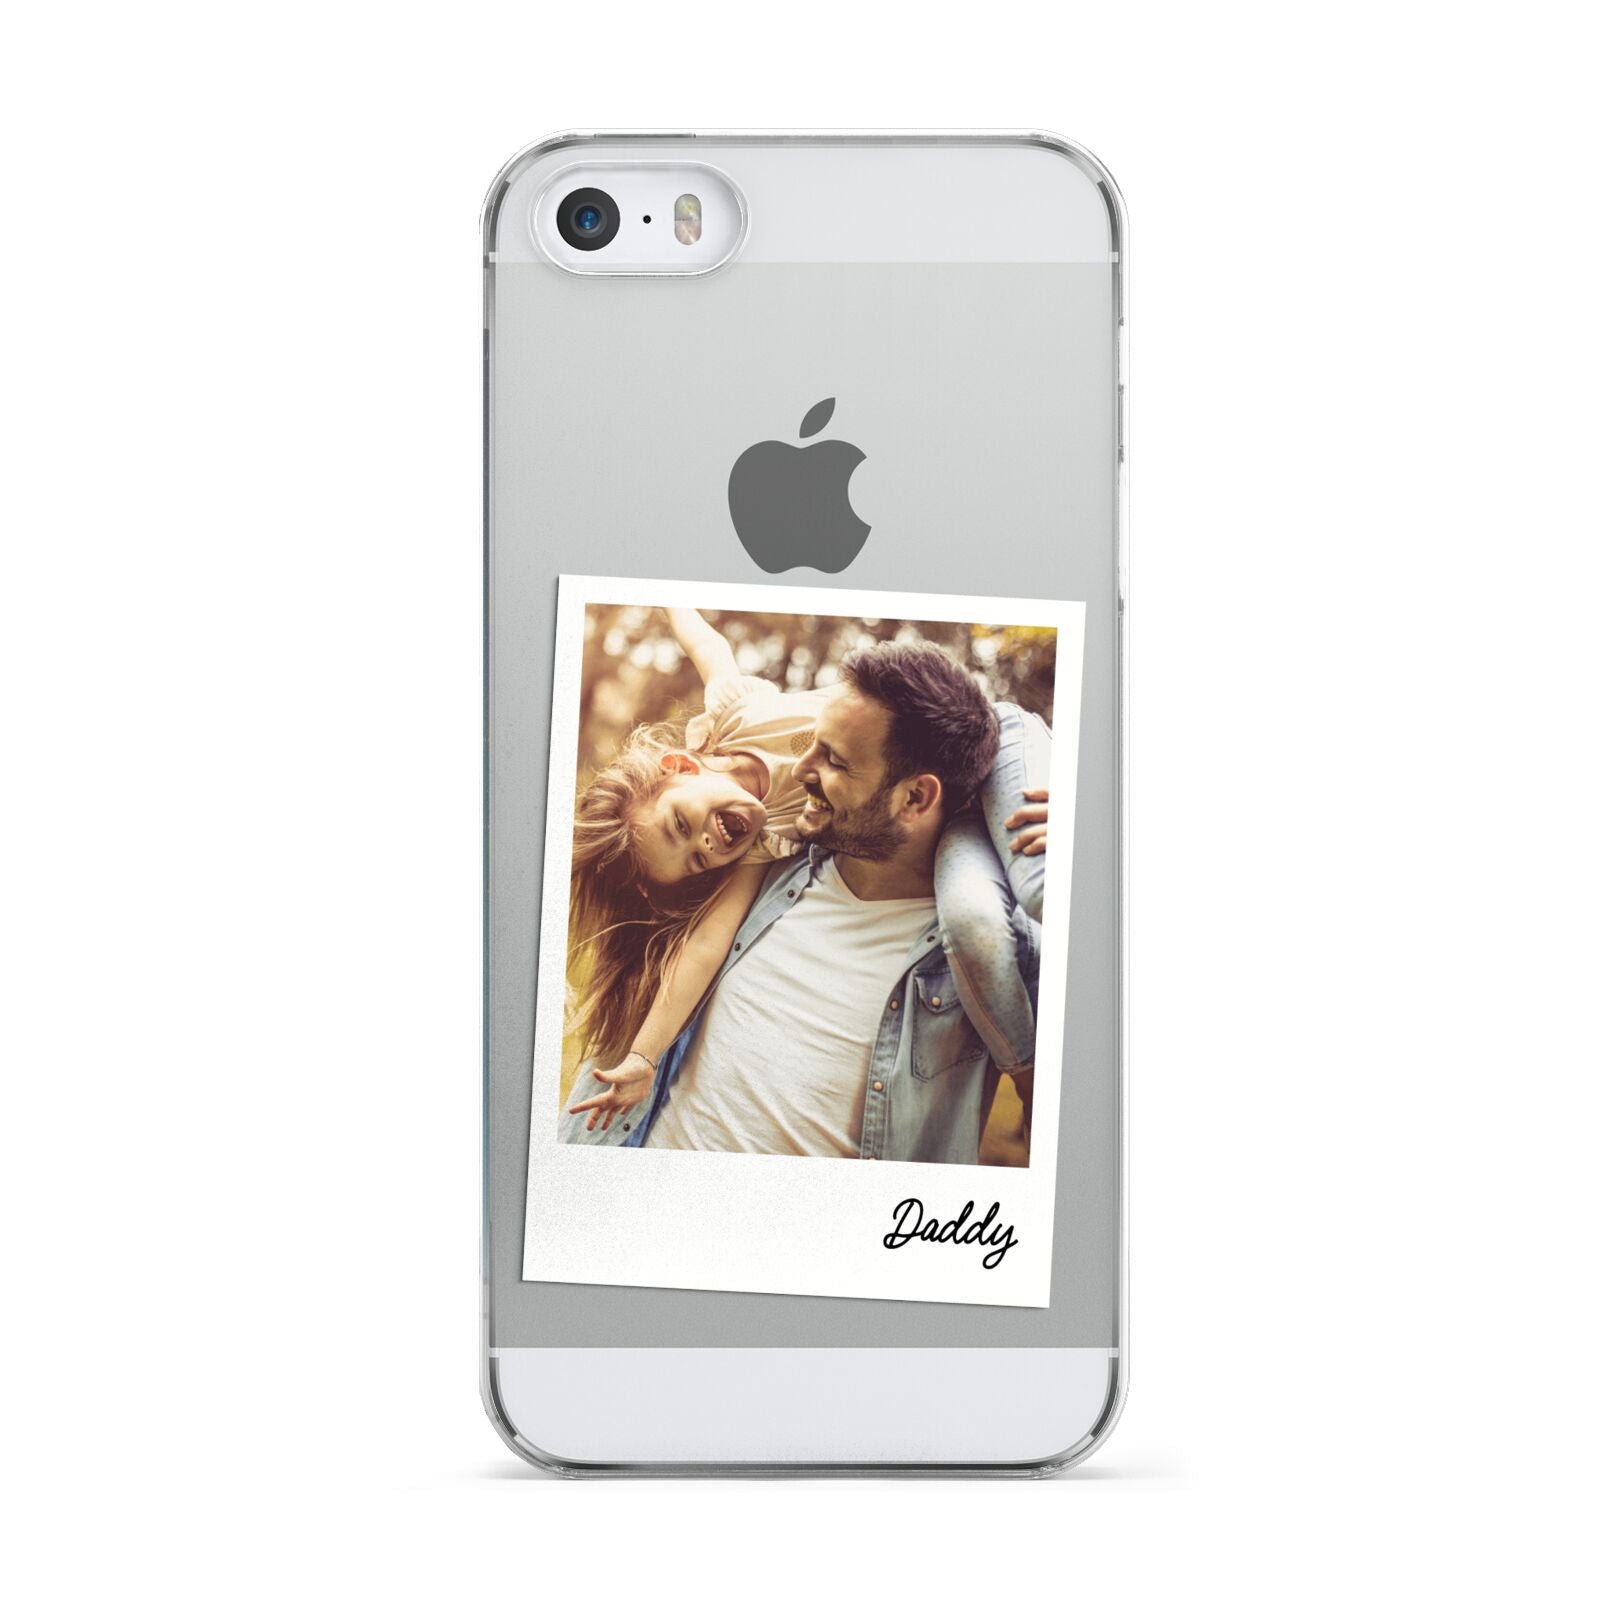 Fathers Day Photo Apple iPhone 5 Case